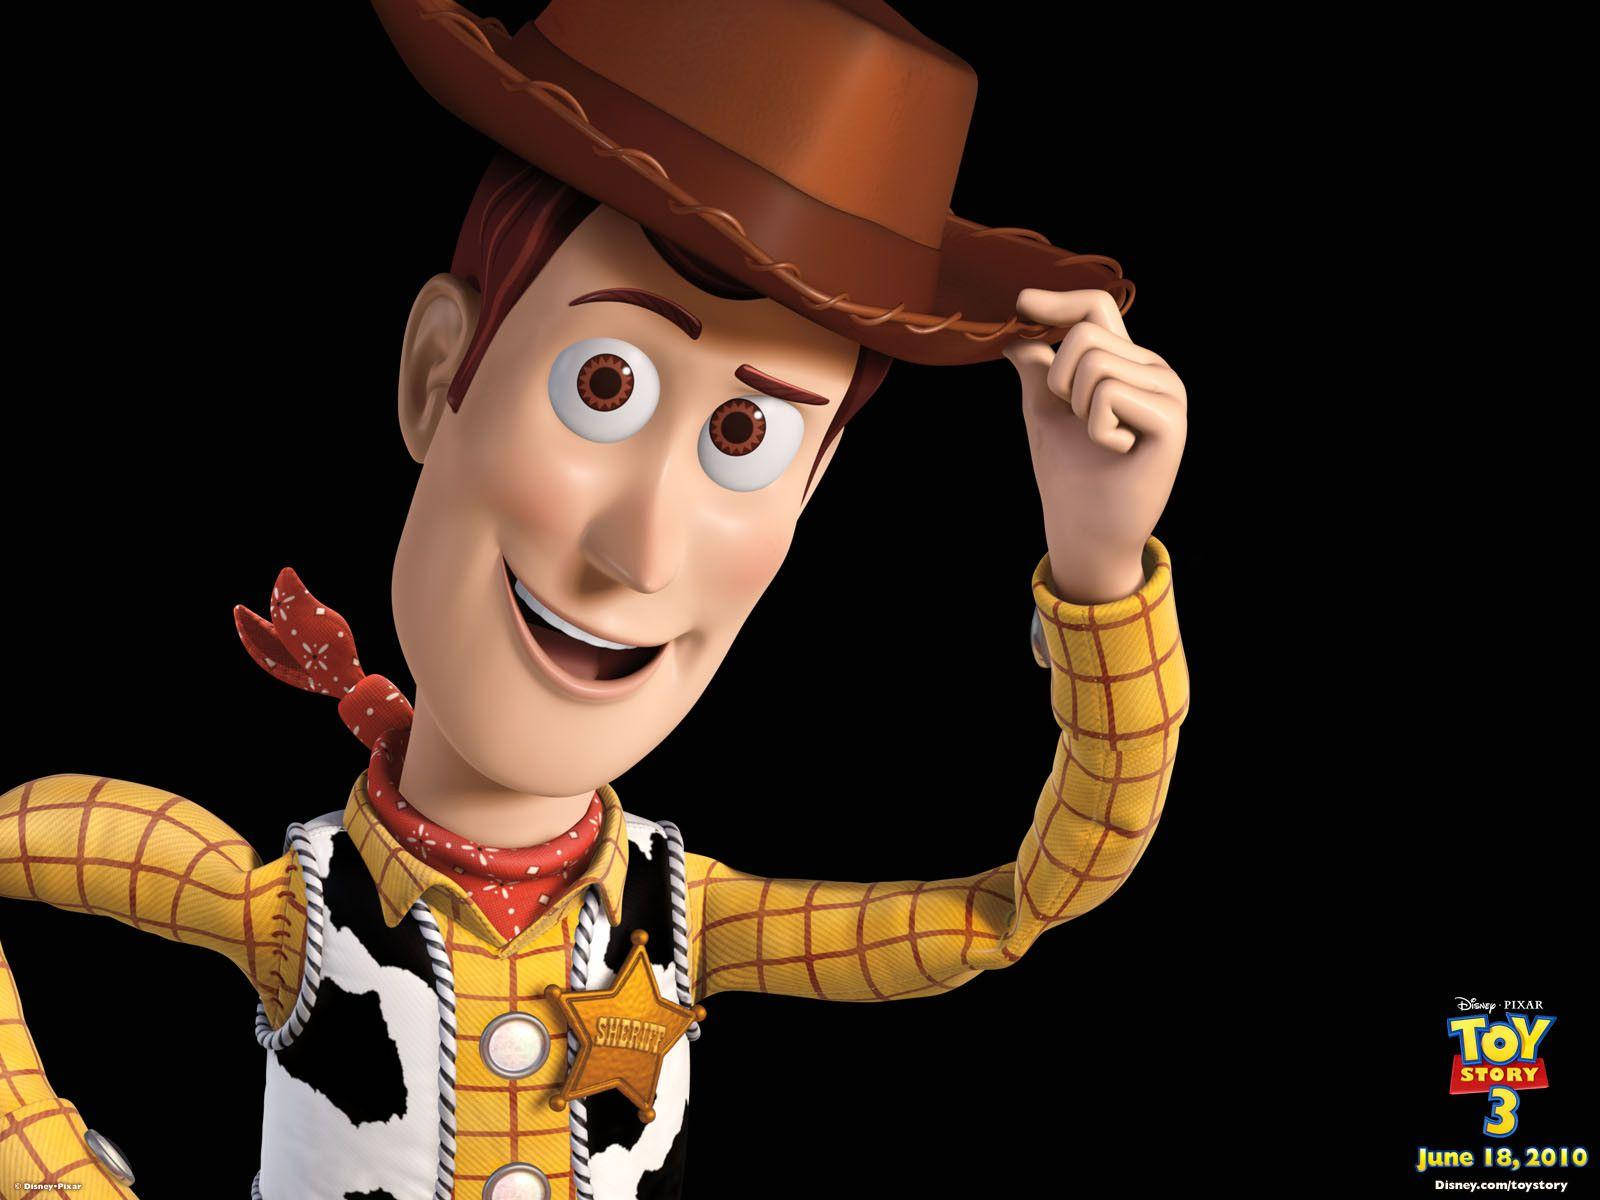 Toy Story 3 Woody: Toy Story 3 Woody Wallpaper